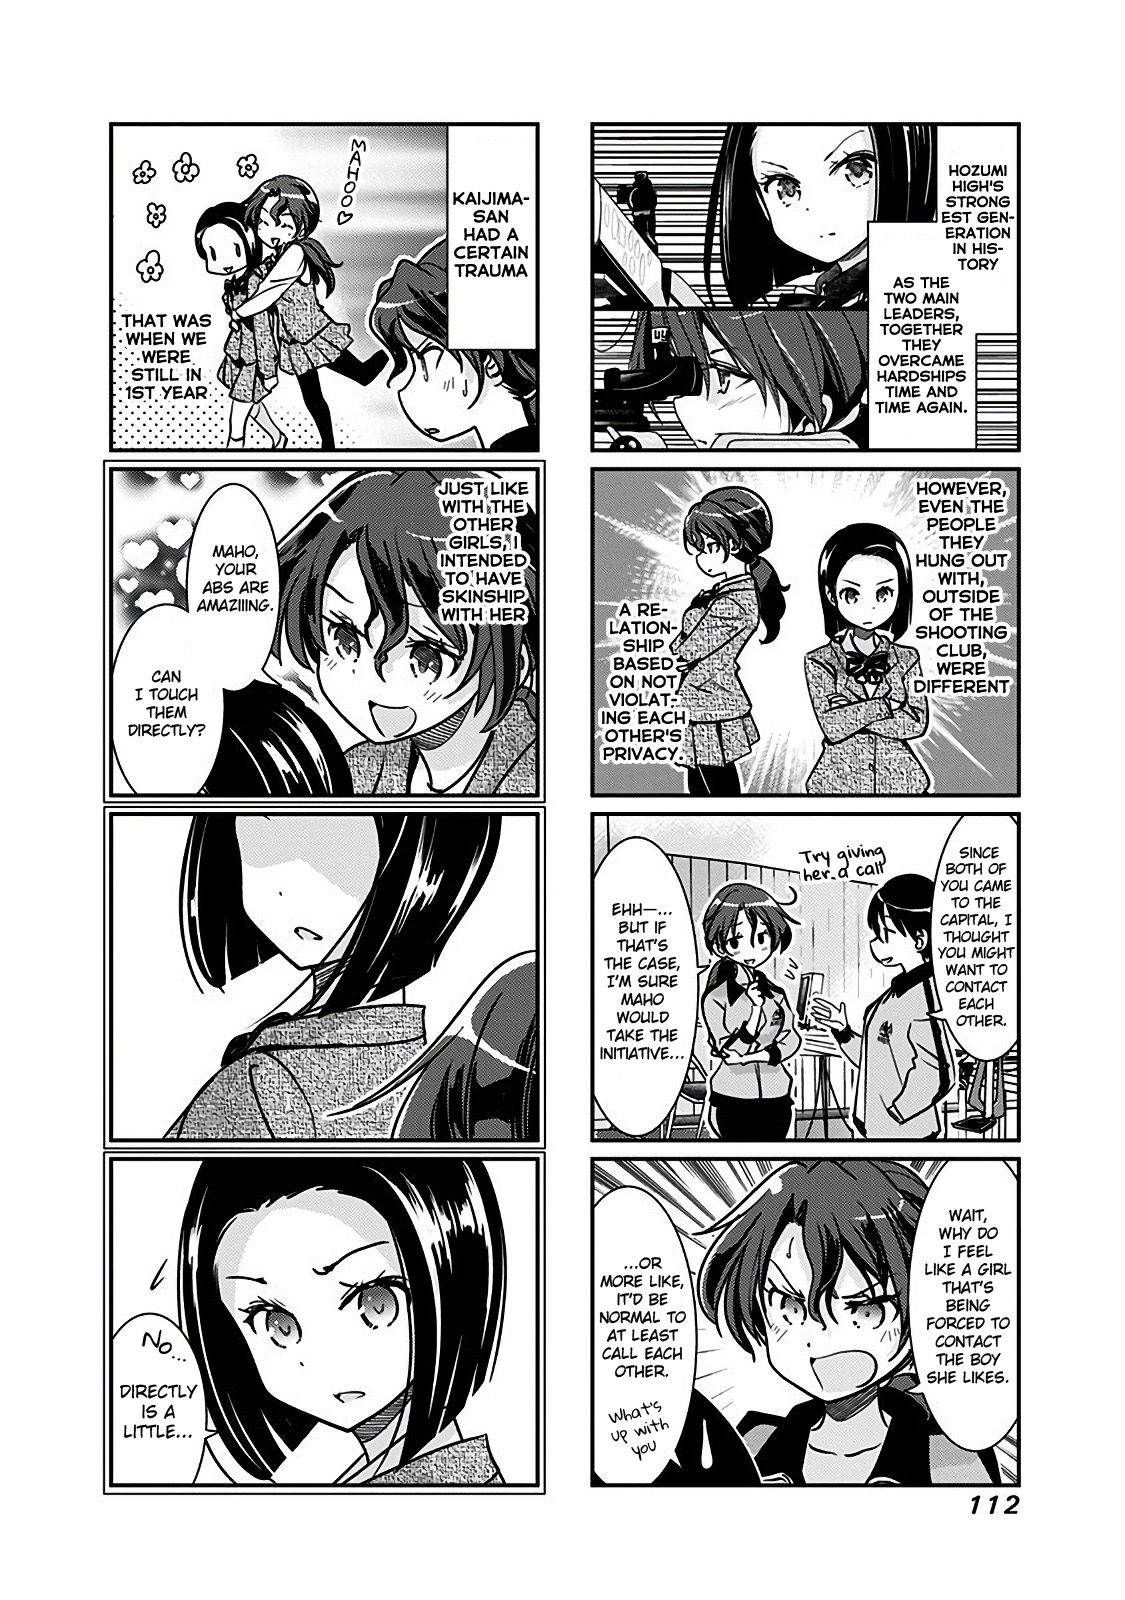 Rifle Is Beautiful Vol.6 Chapter 157: Kogomori And Kaijima's Unexpectedly Delicate Line Convo - Picture 3